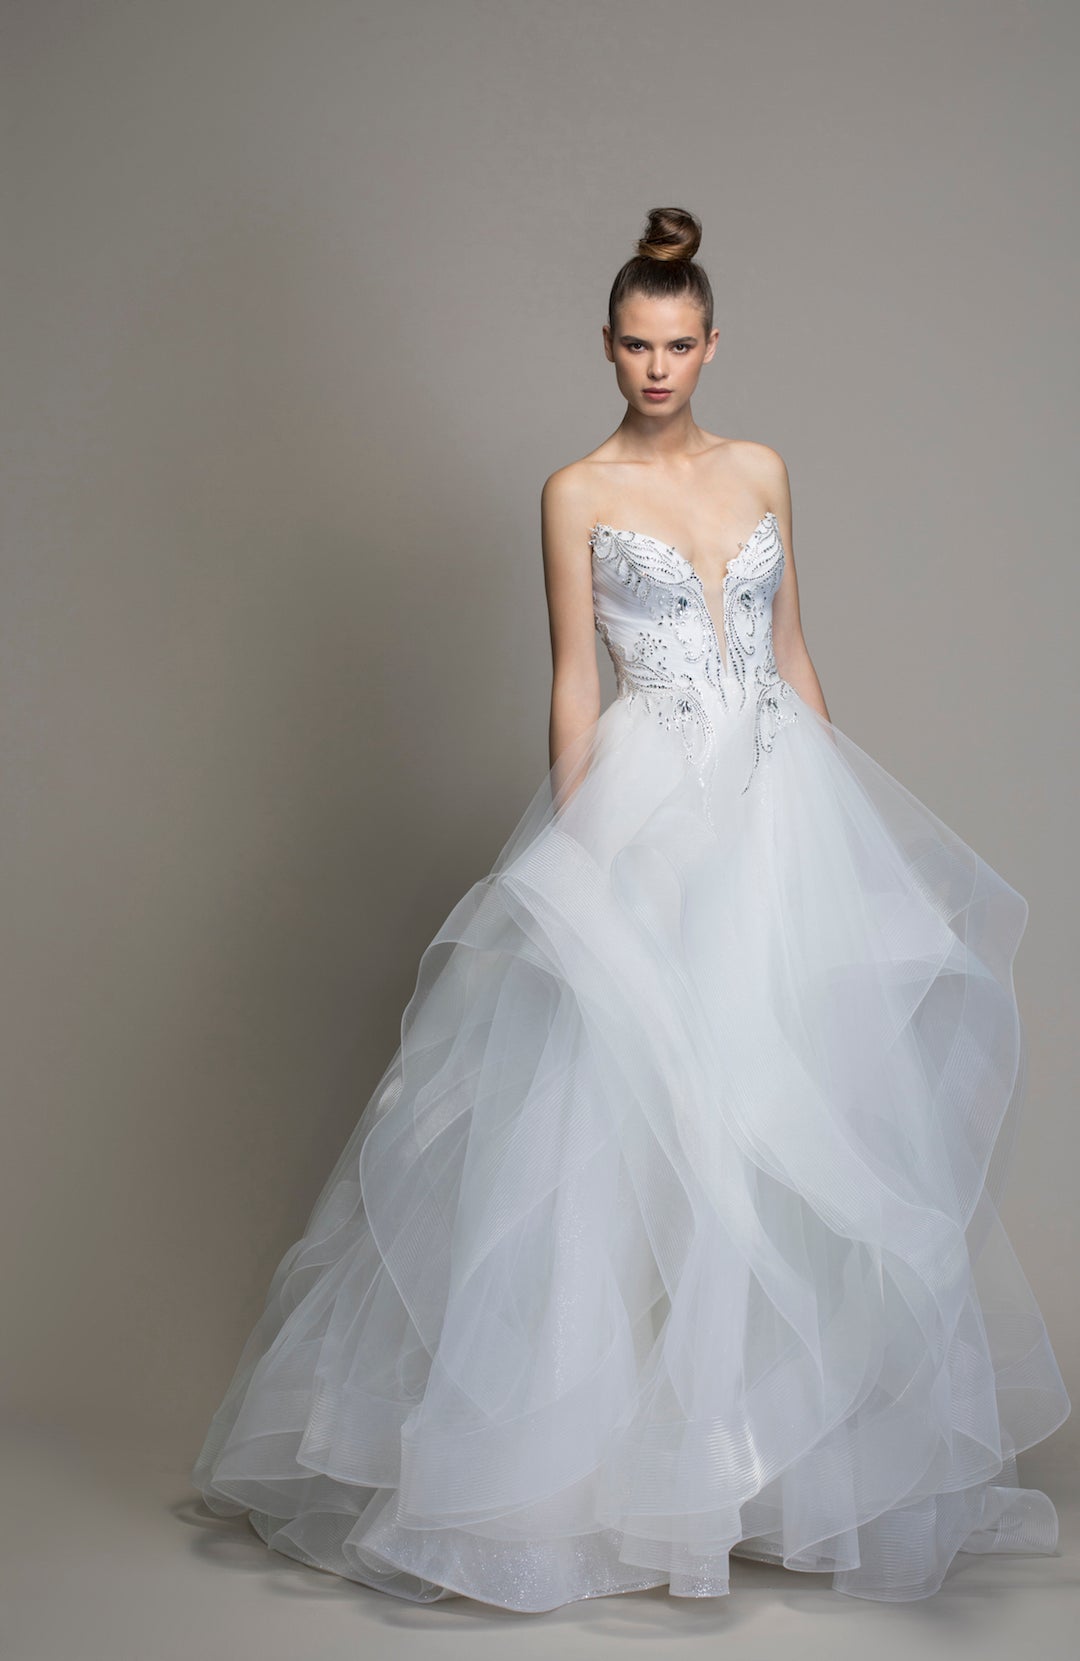 Pnina Tornai's new LOVE 2020 Collection is out! This is style 14756